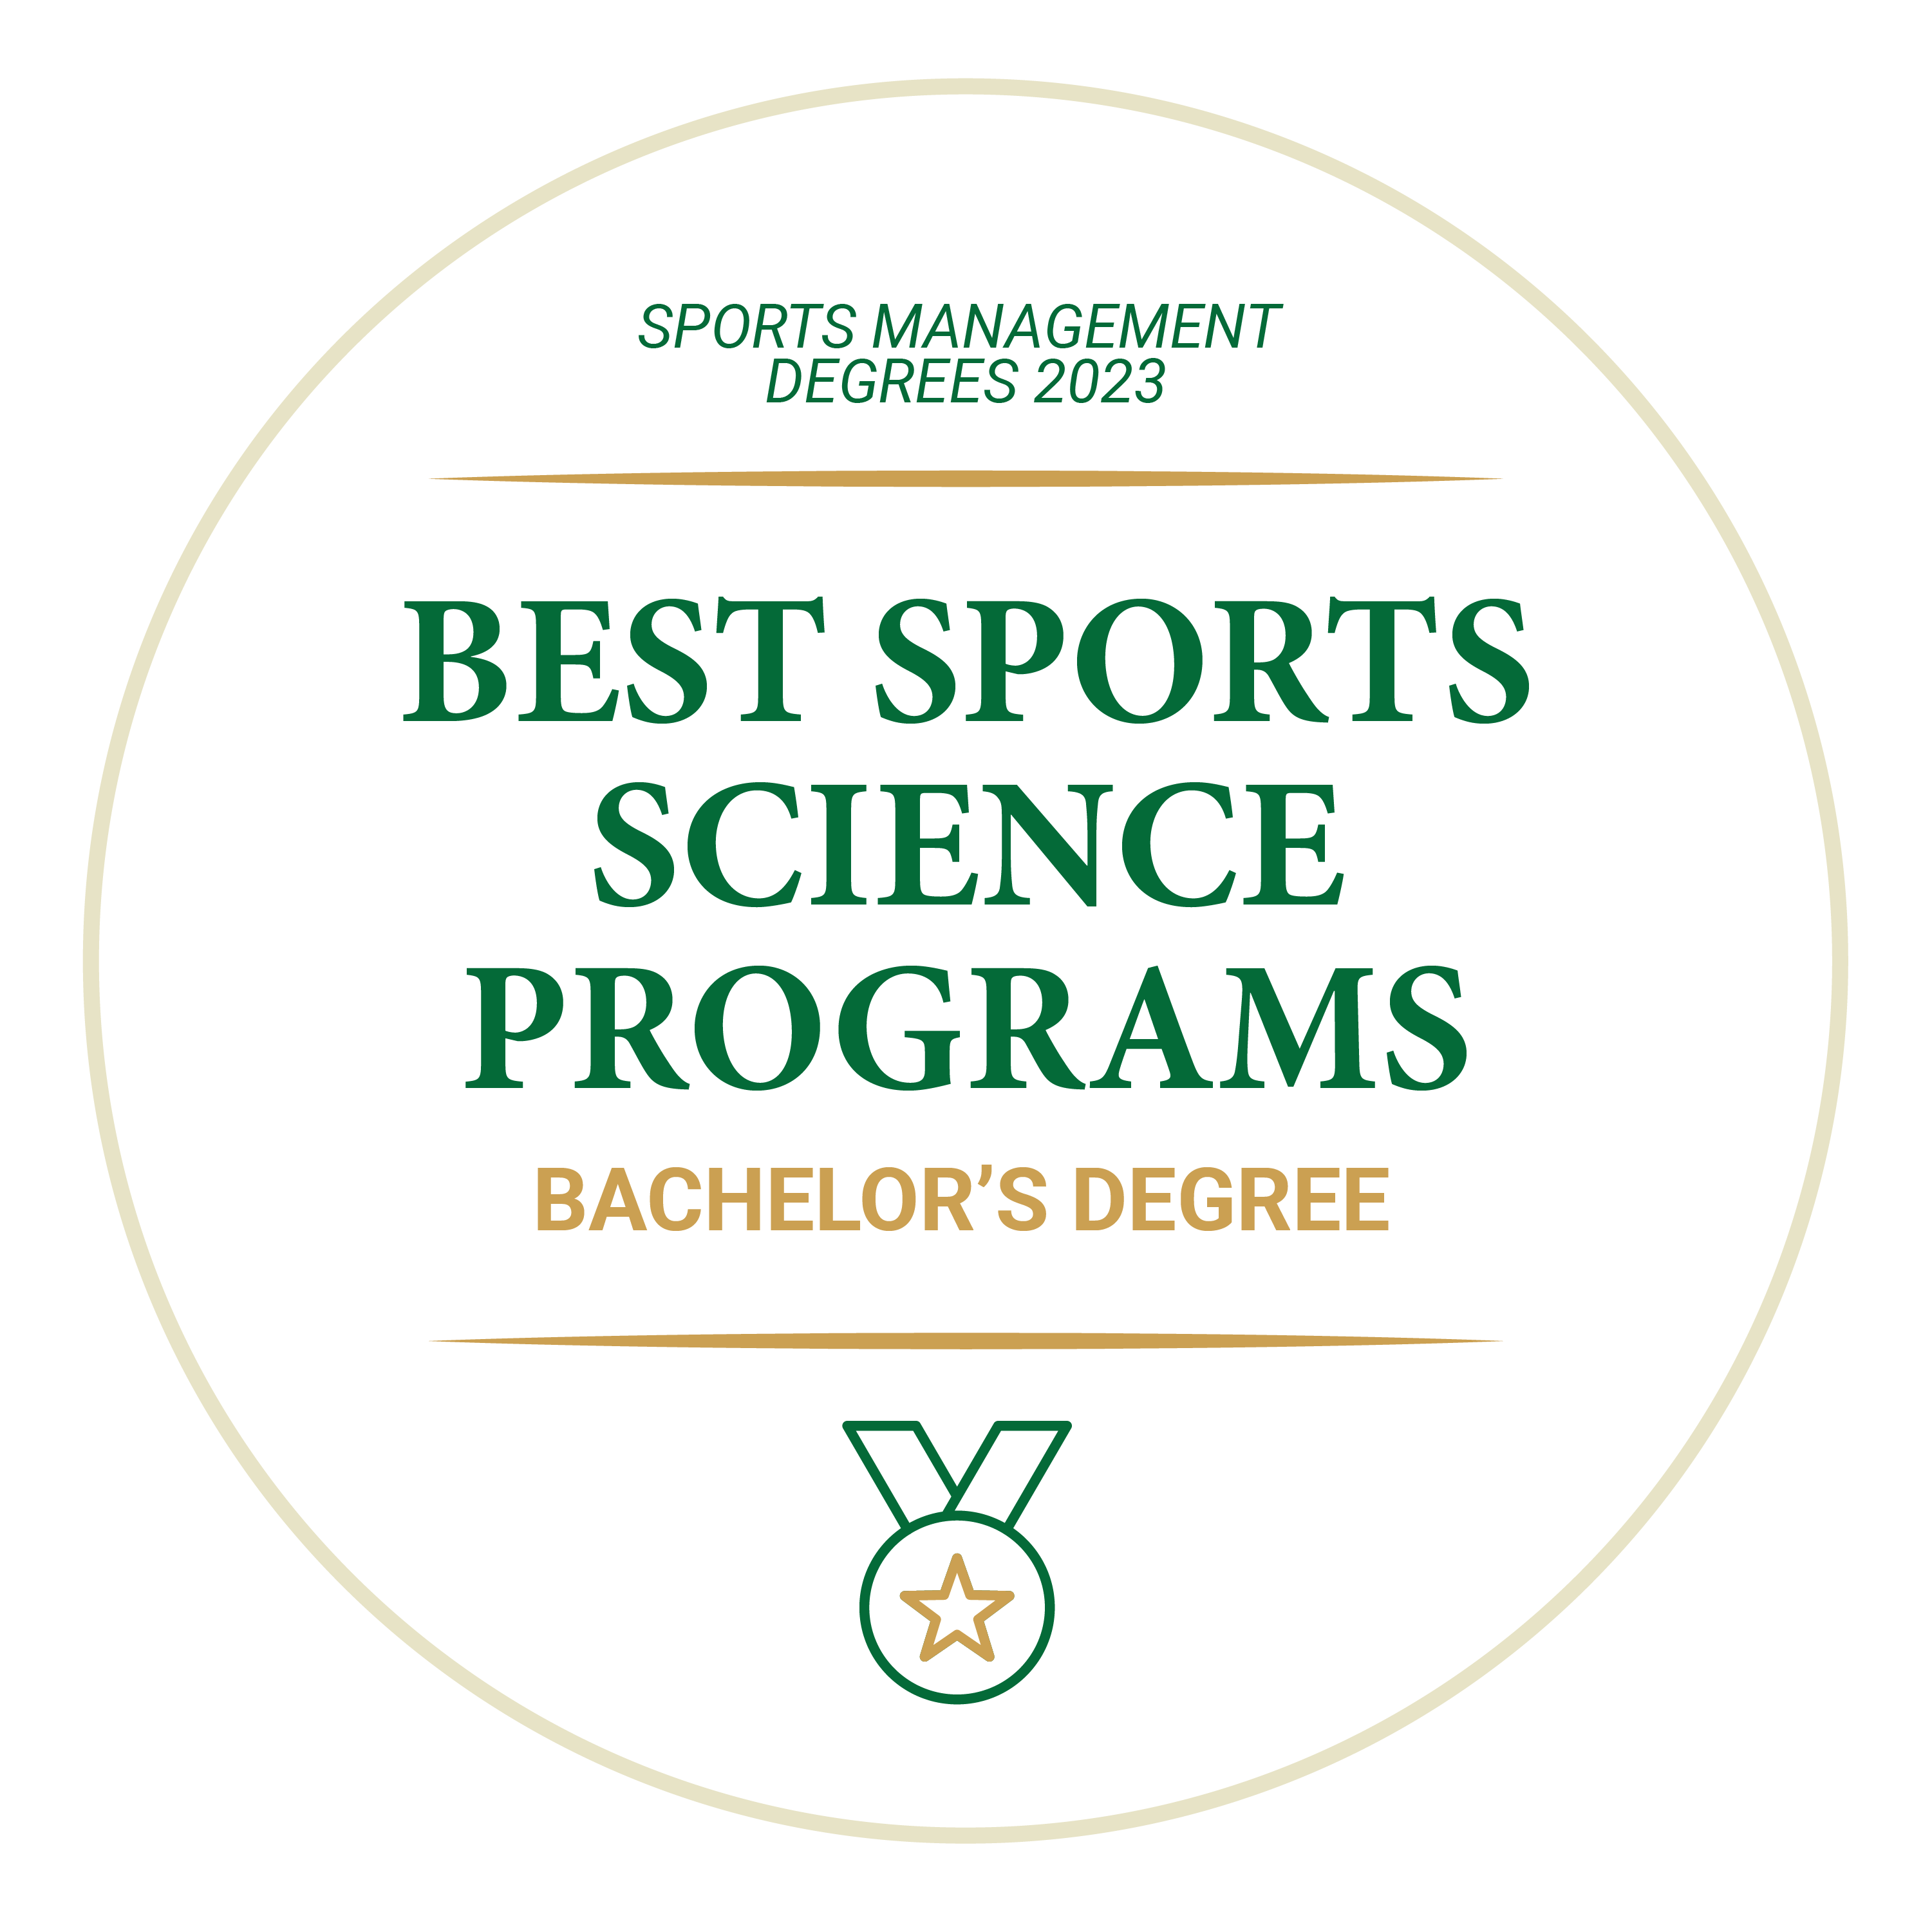 2020 Sports Management Degrees 2020 Best Sports Science Programs Bachelors Degree